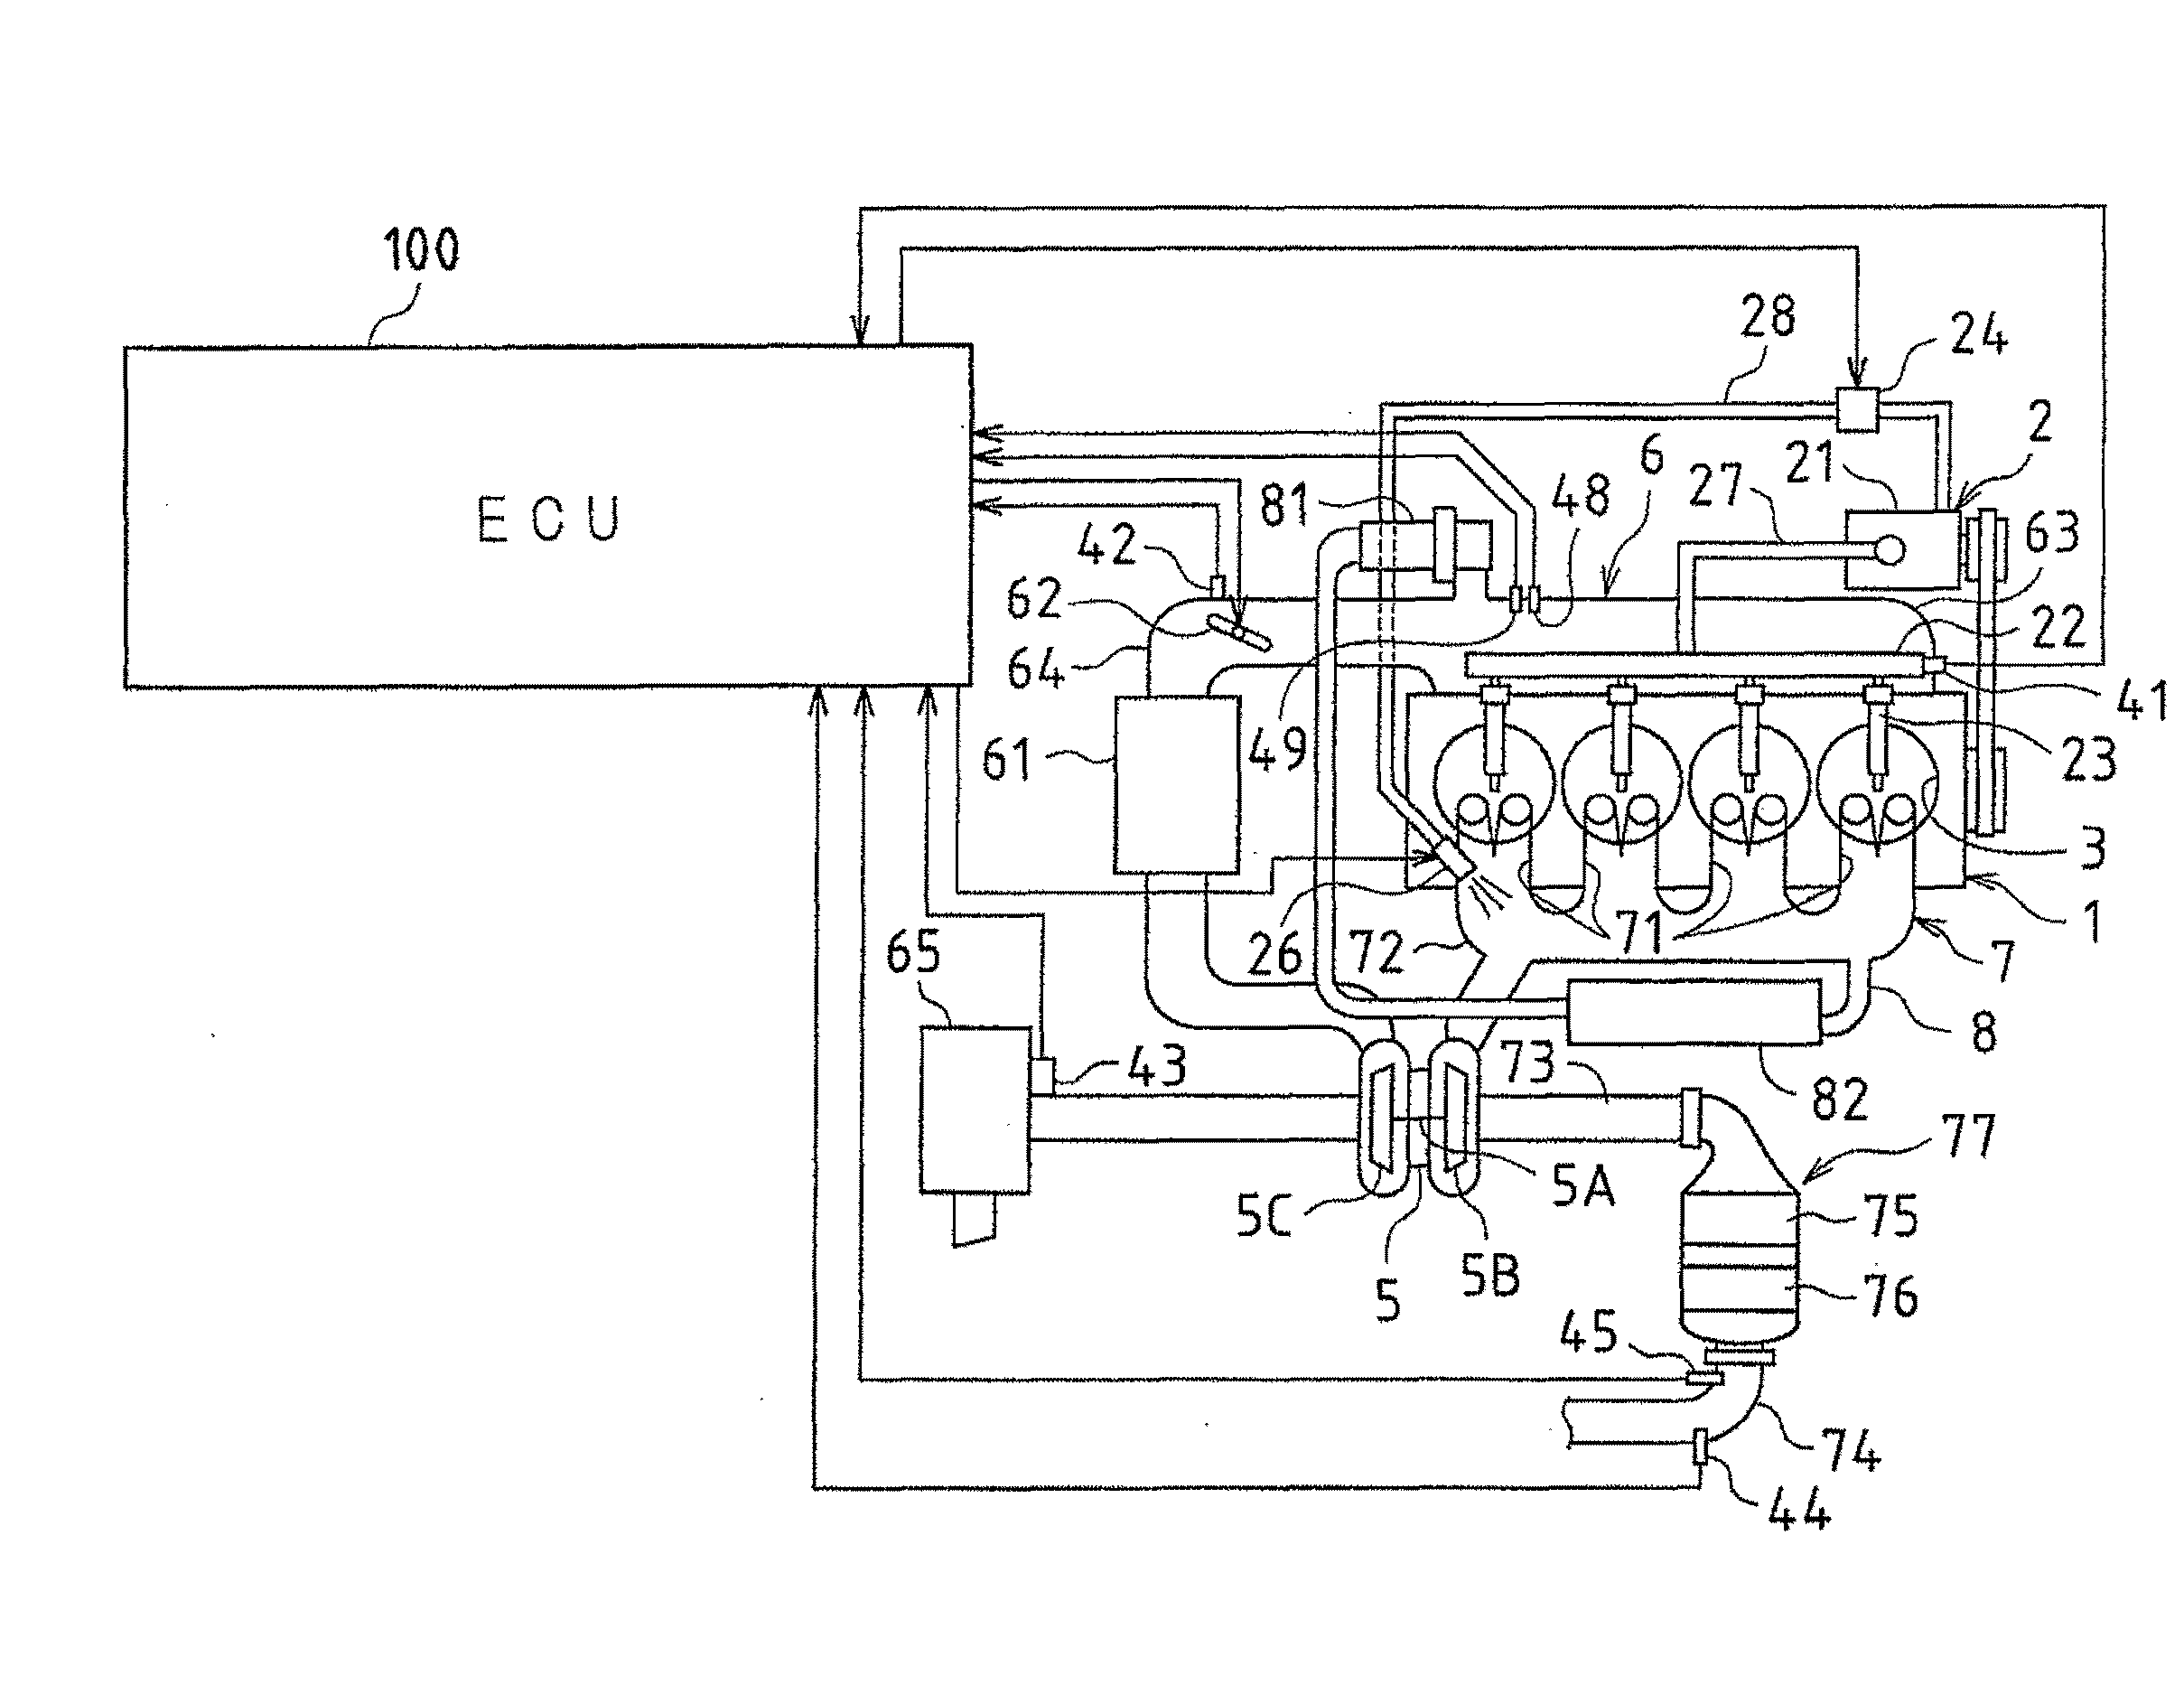 Fuel injection control apparatus of internal combustion engine